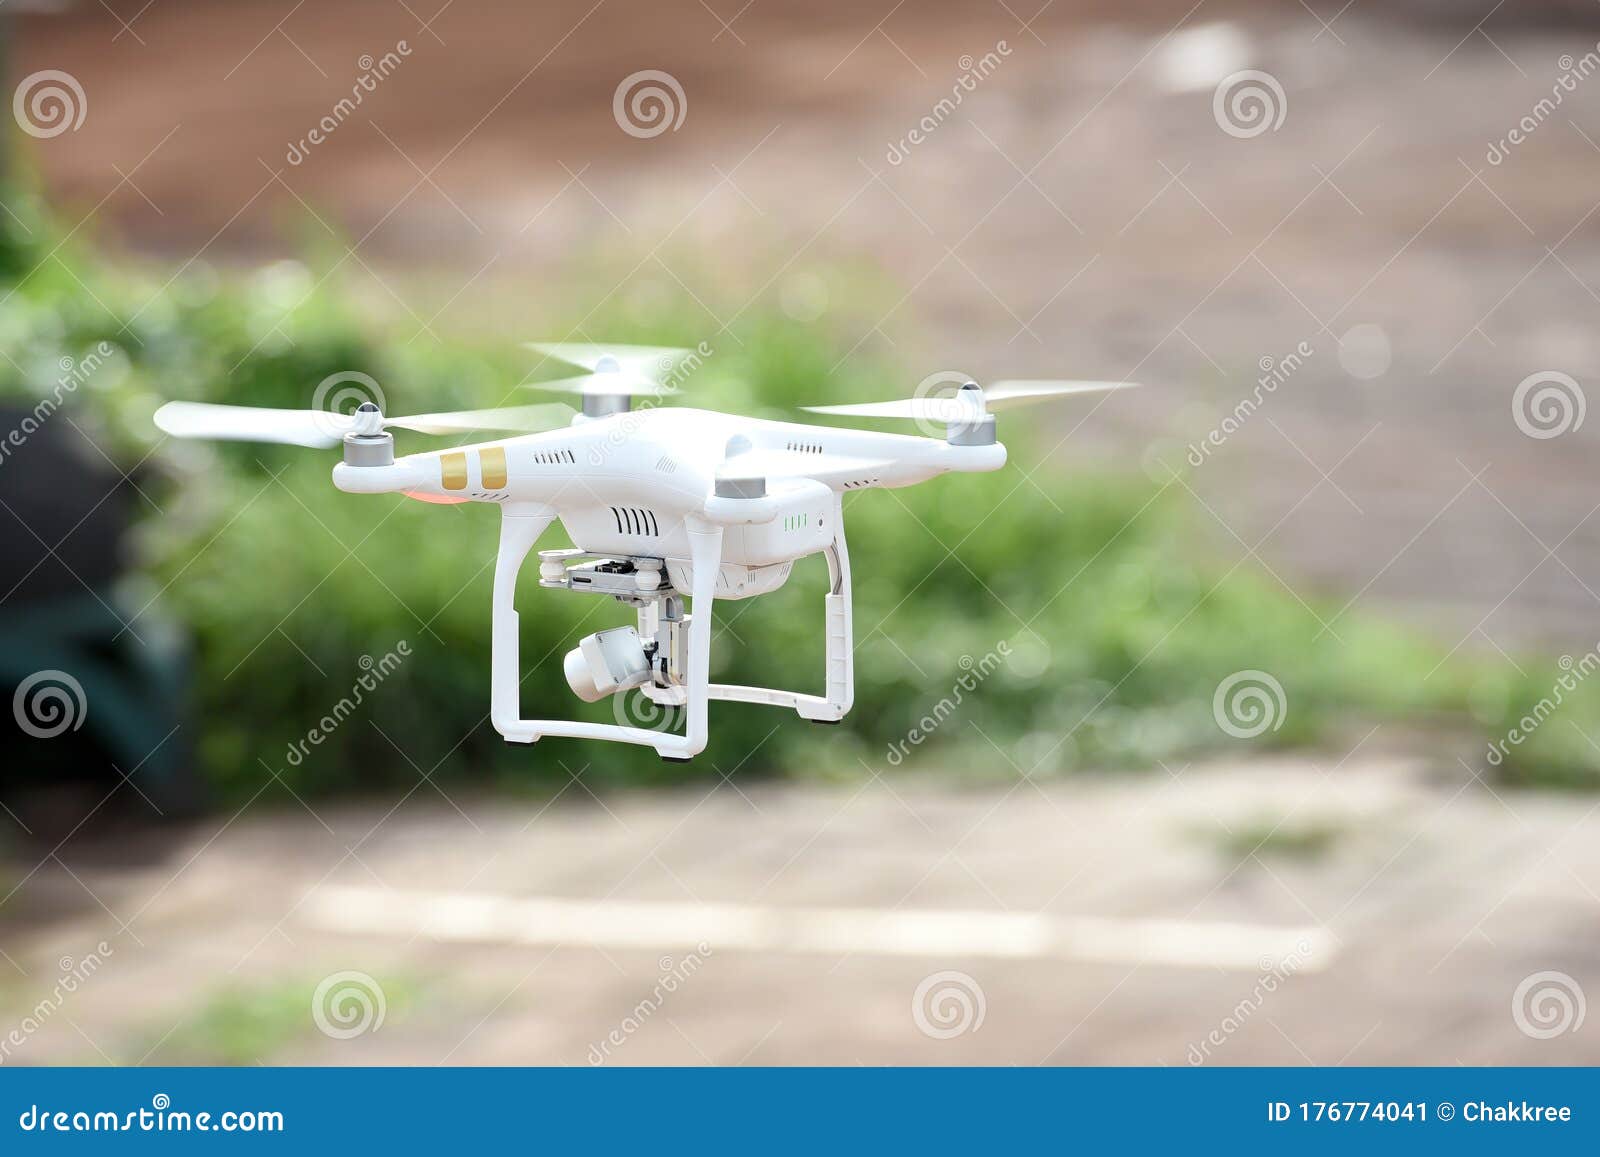 drone quad copter with high resolution digital camera on the sky